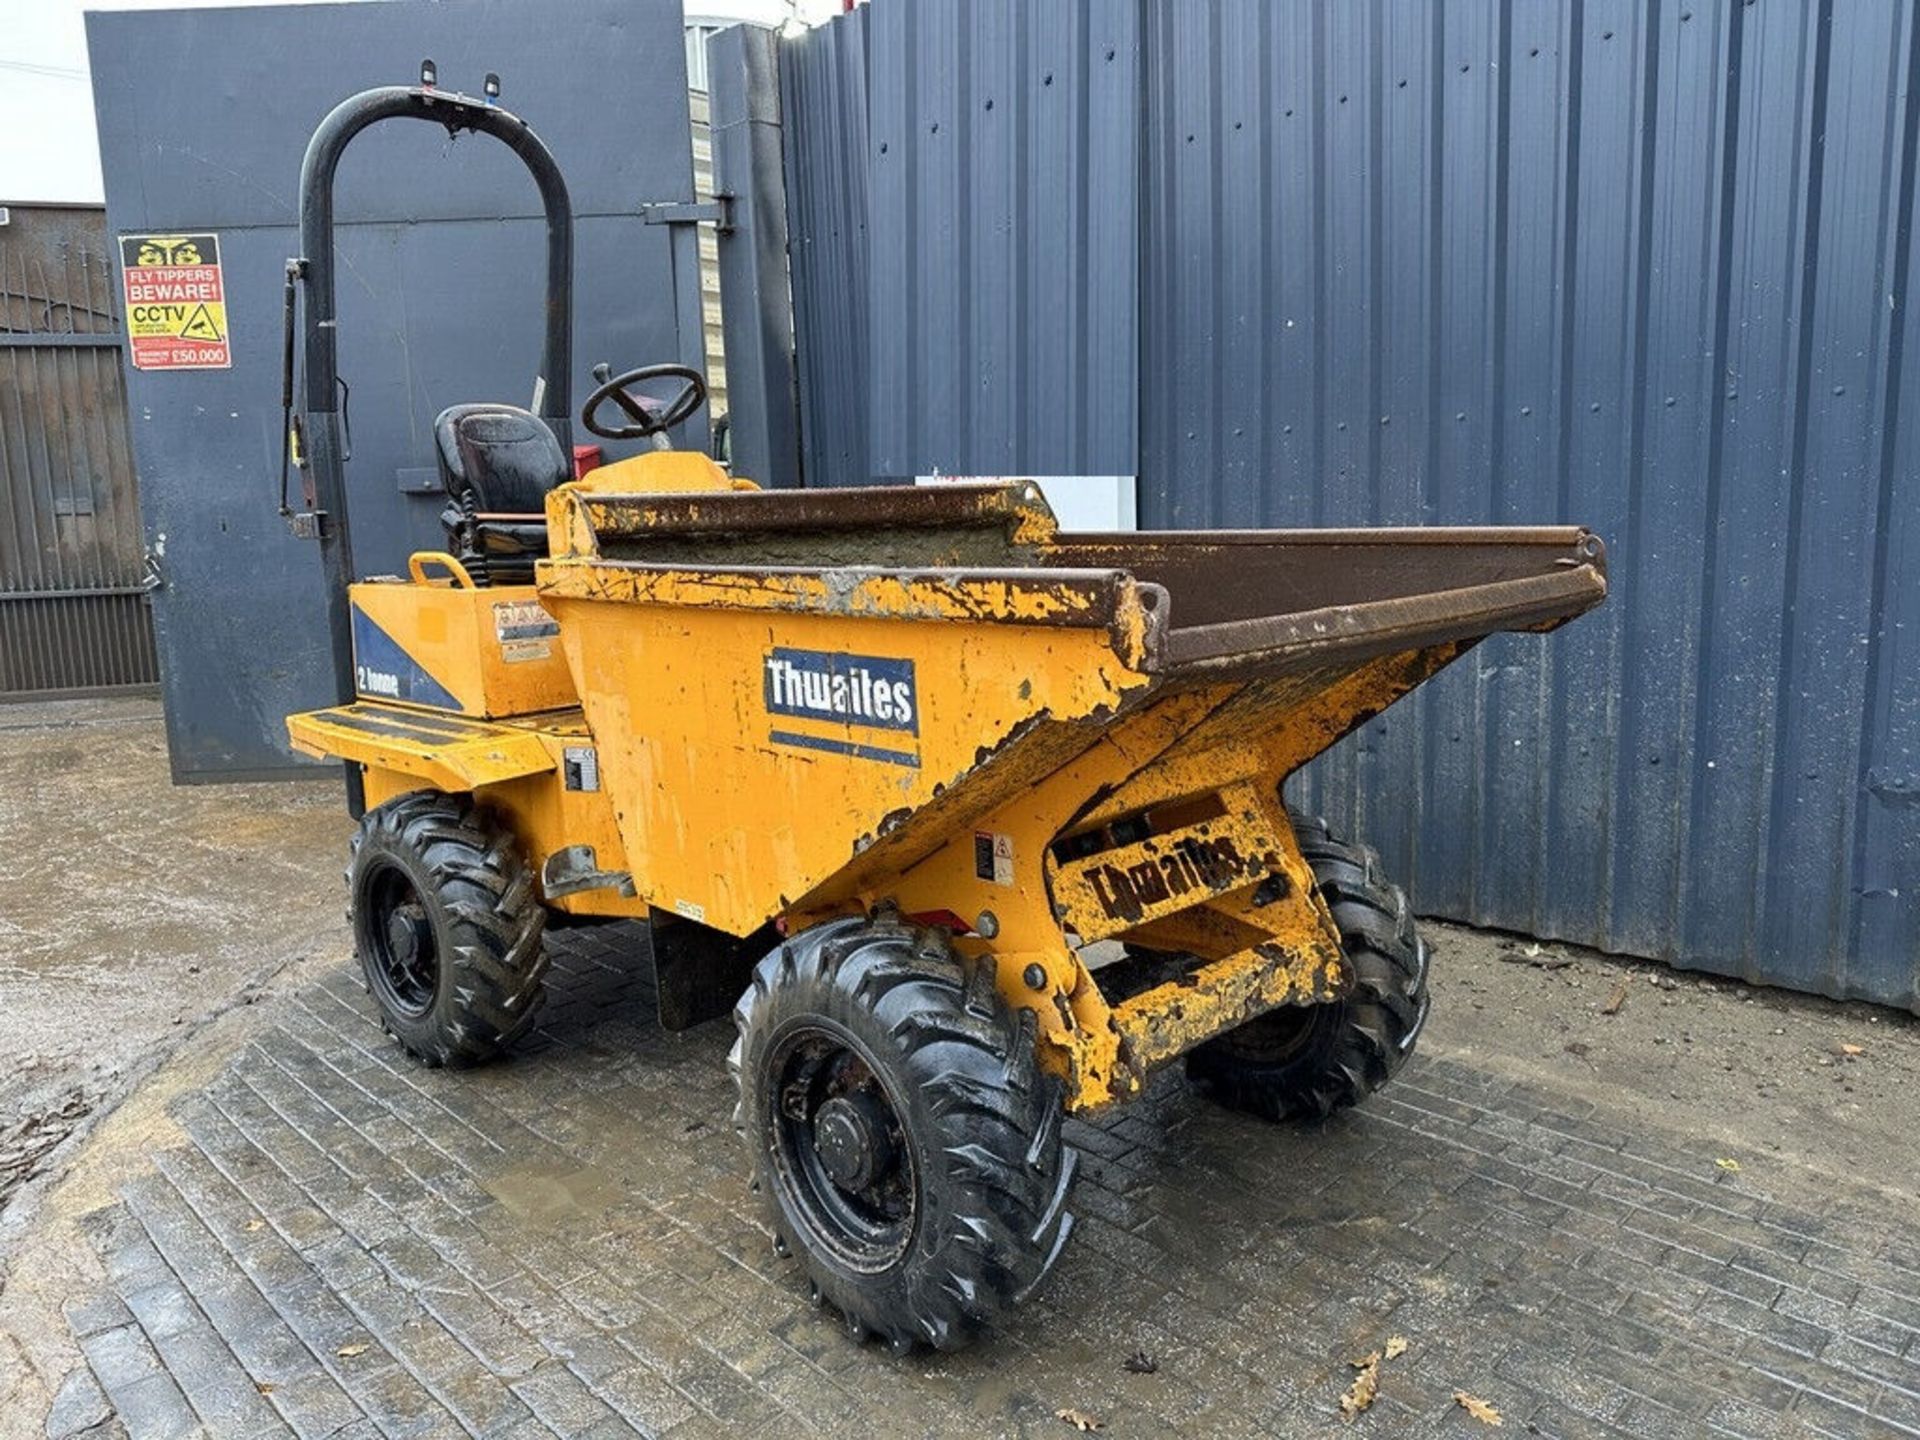 2017 THWAITES 2 TONNE DUMPER: UNMATCHED POWER WITH 931 HOURS - Image 10 of 12